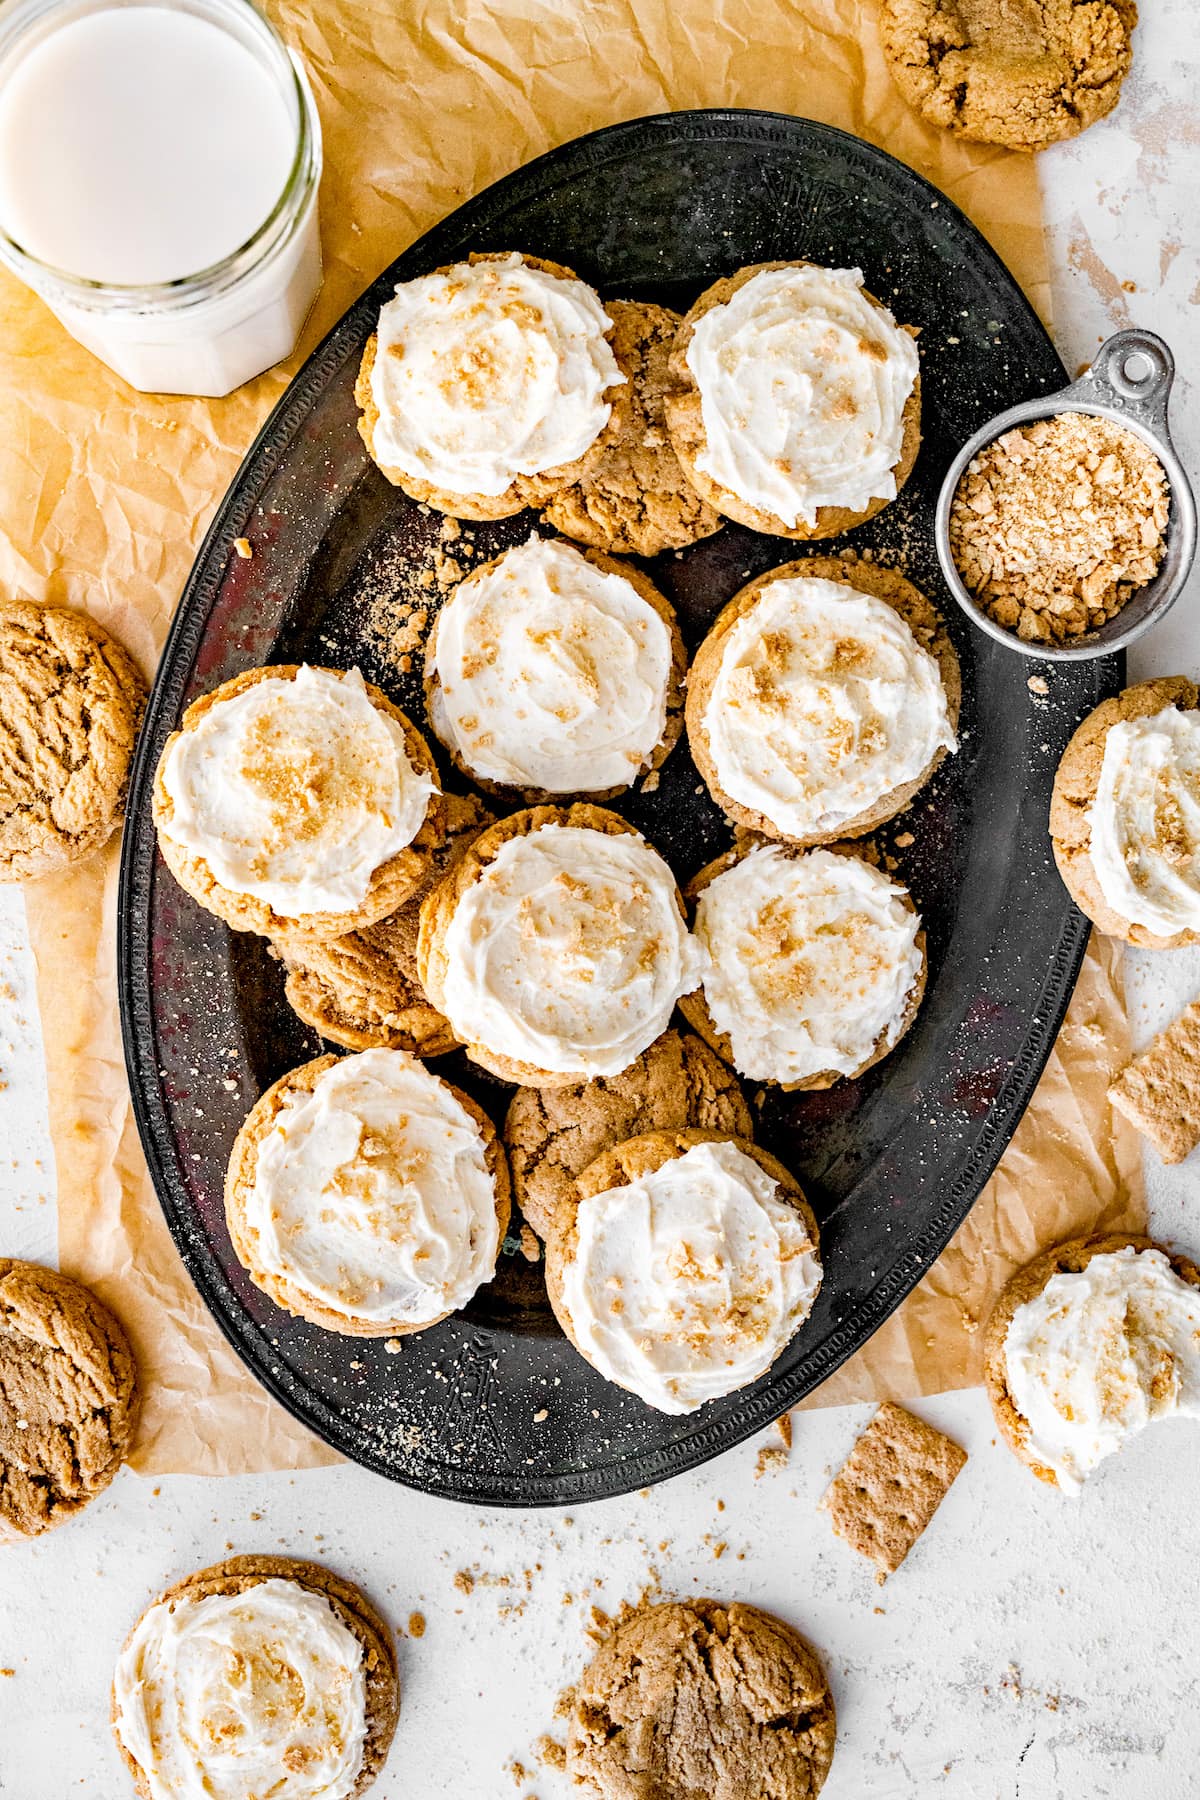 graham cracker cookies with frosting on platter with graham cracker crumbs and glass of milk.